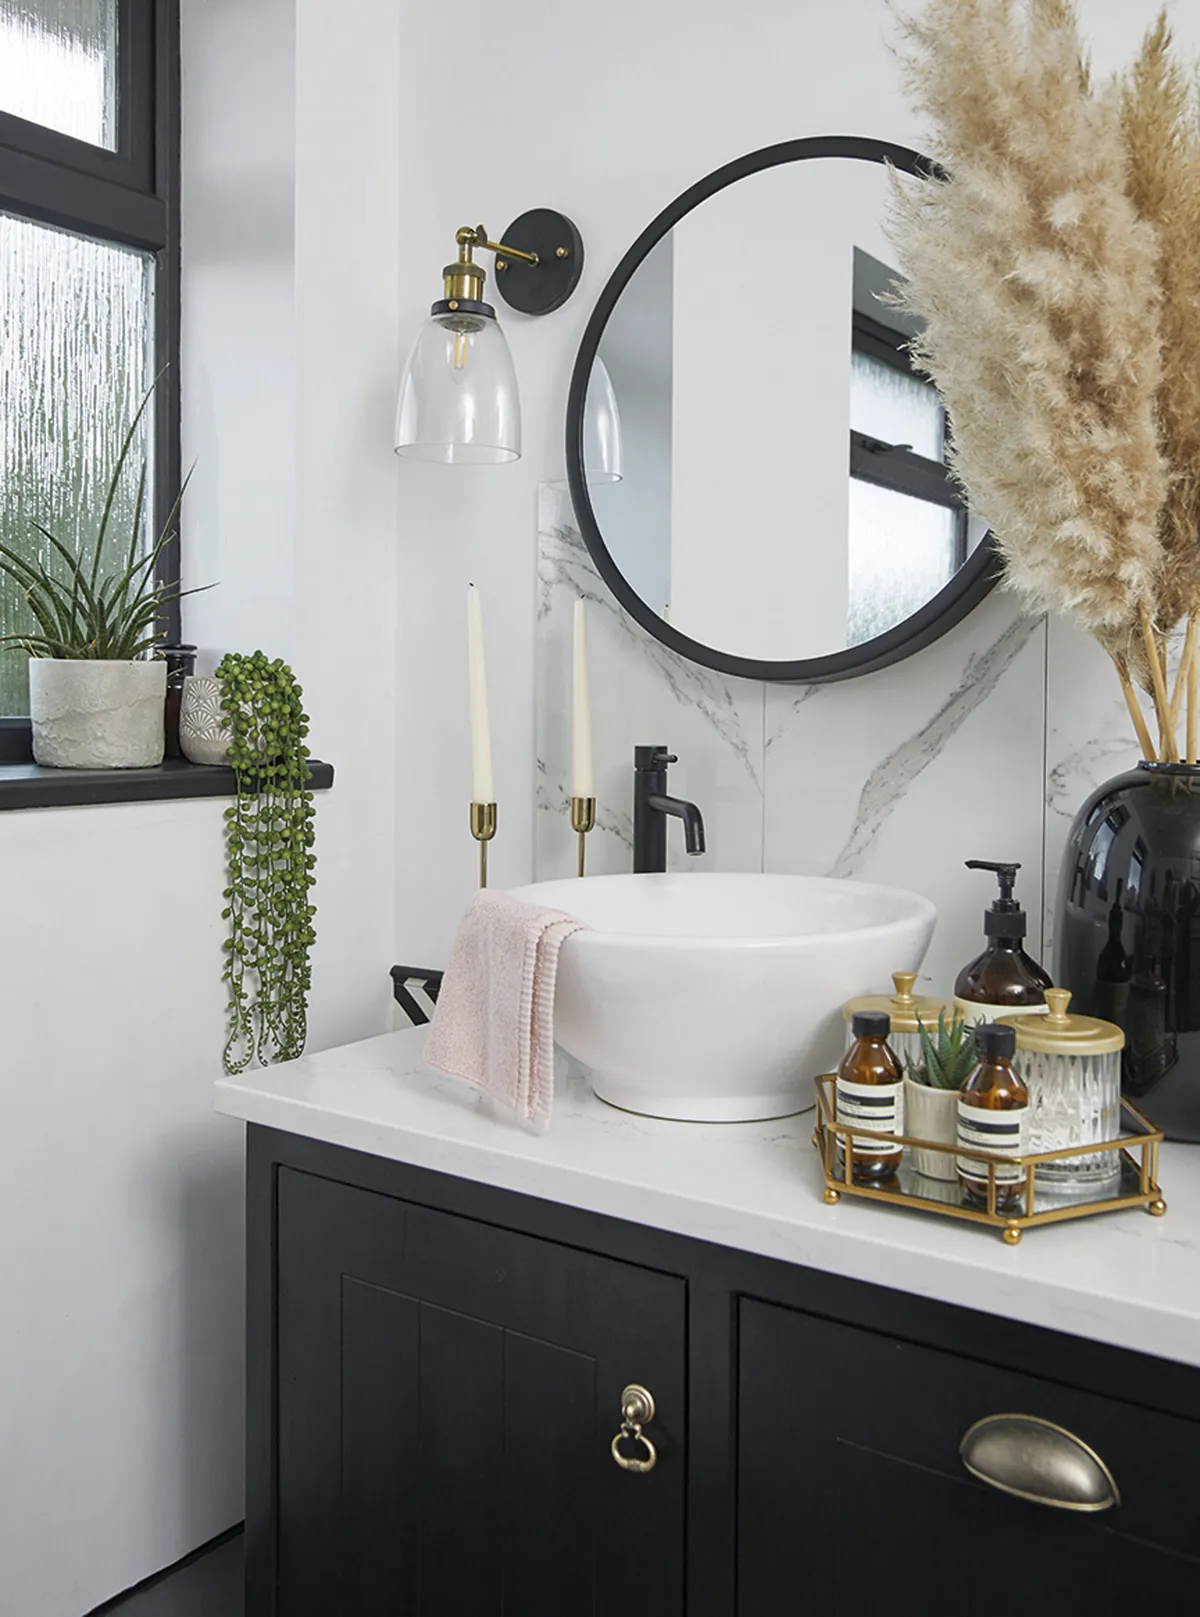 Style idea: Add an air of hotel luxe with twin basins